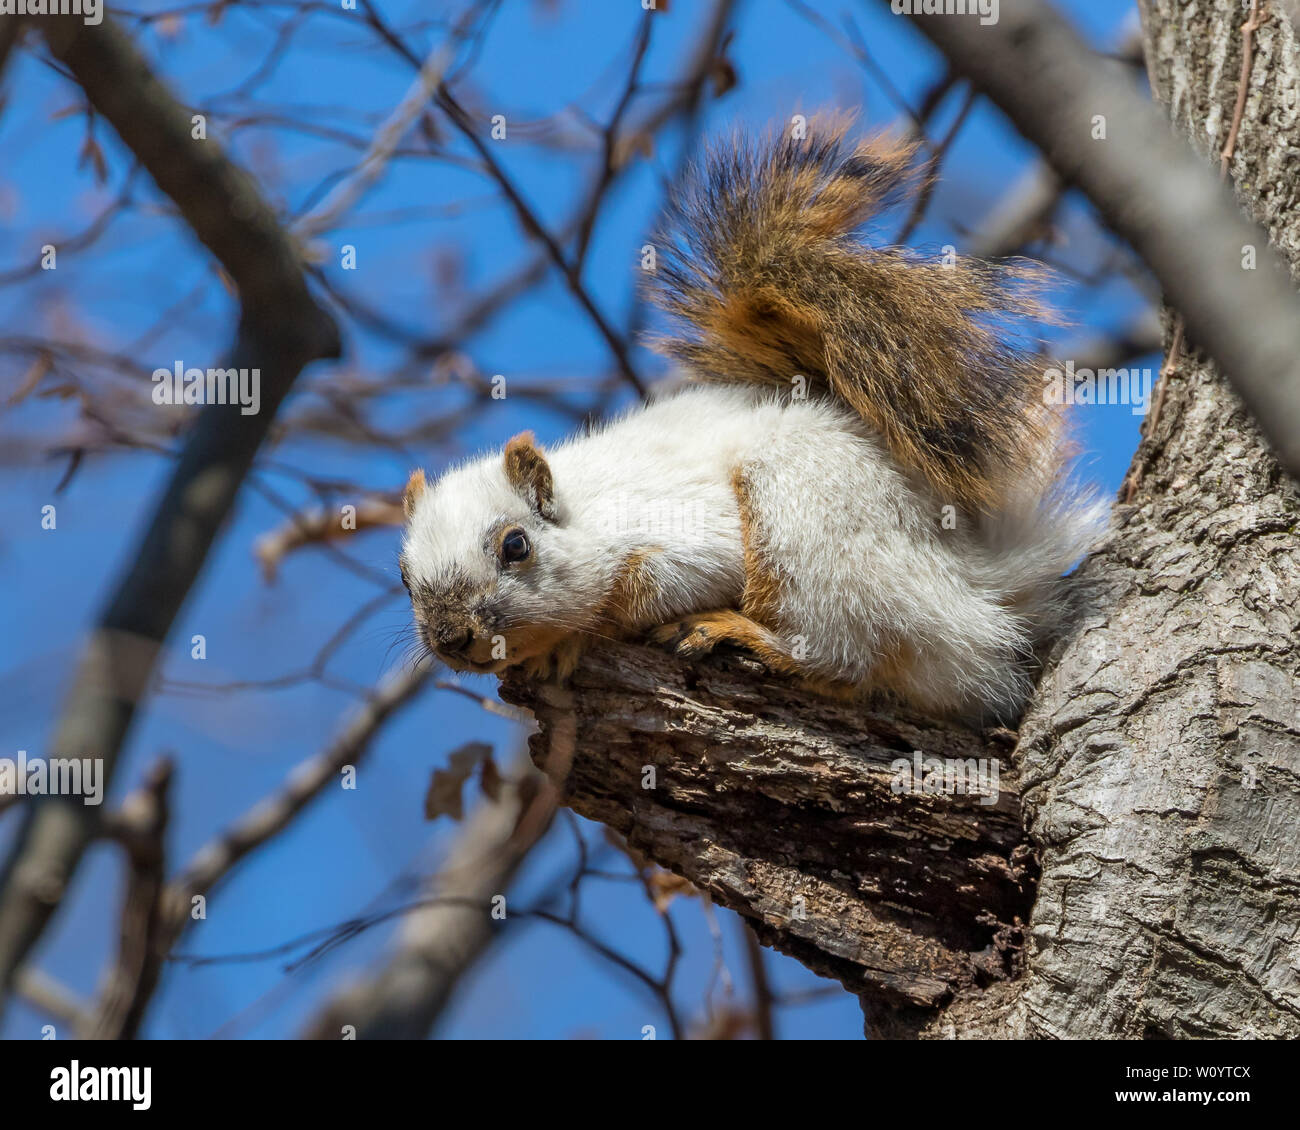 Rare White Morph Fox squirrel sitting in a tree looking down in a nature preserve forest Stock Photo